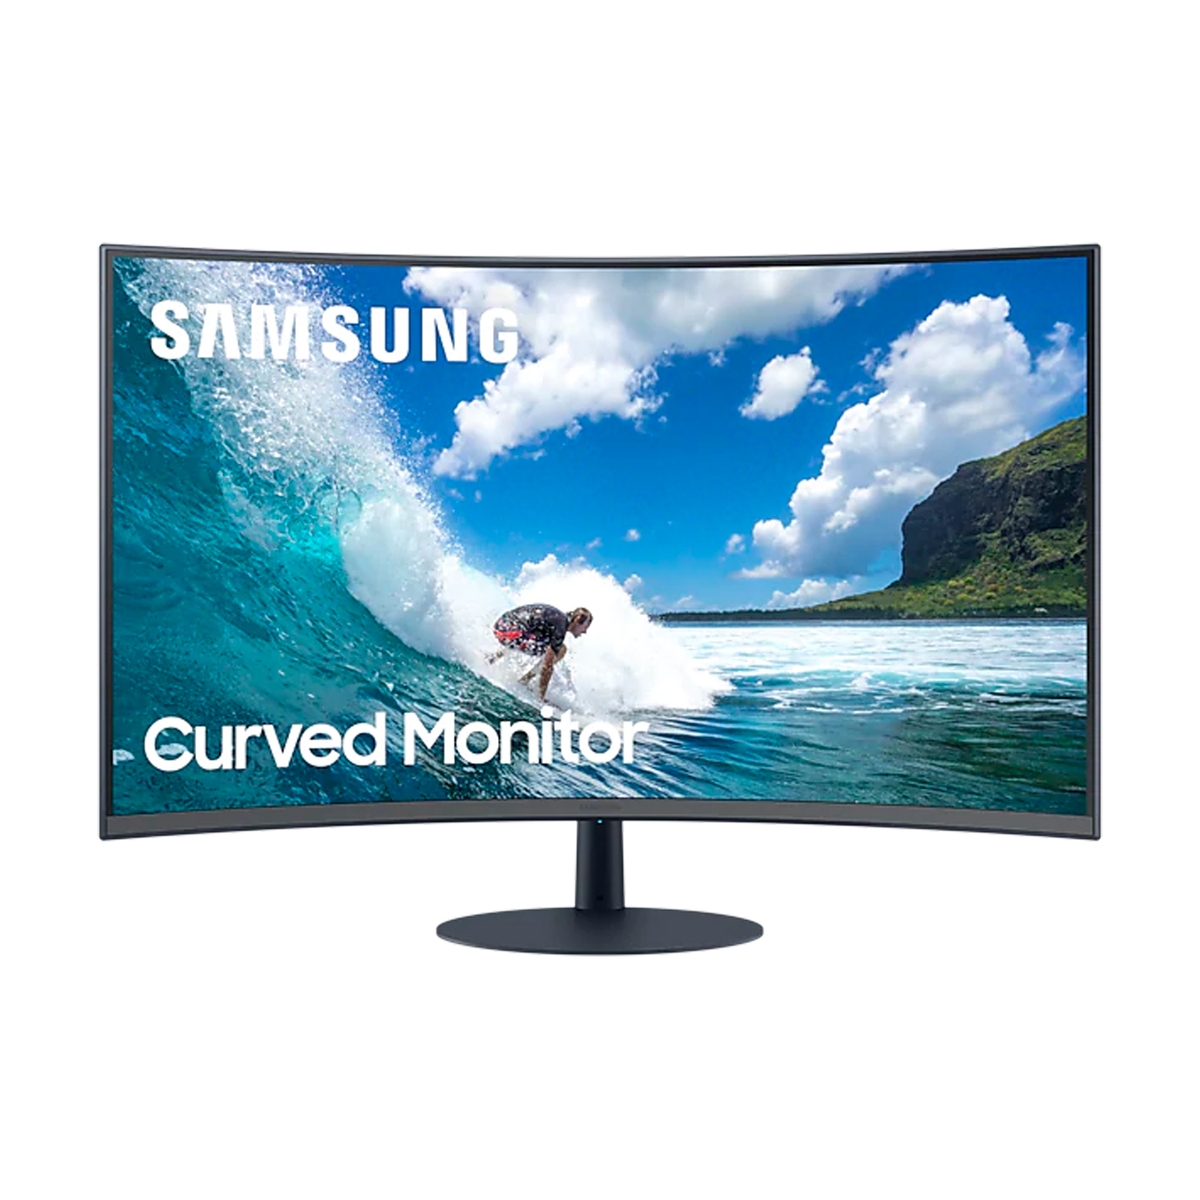 Samsung 32" Odyssey G5 WQHD Gaming Monitor with 1000R curved screen LC32G55-G5